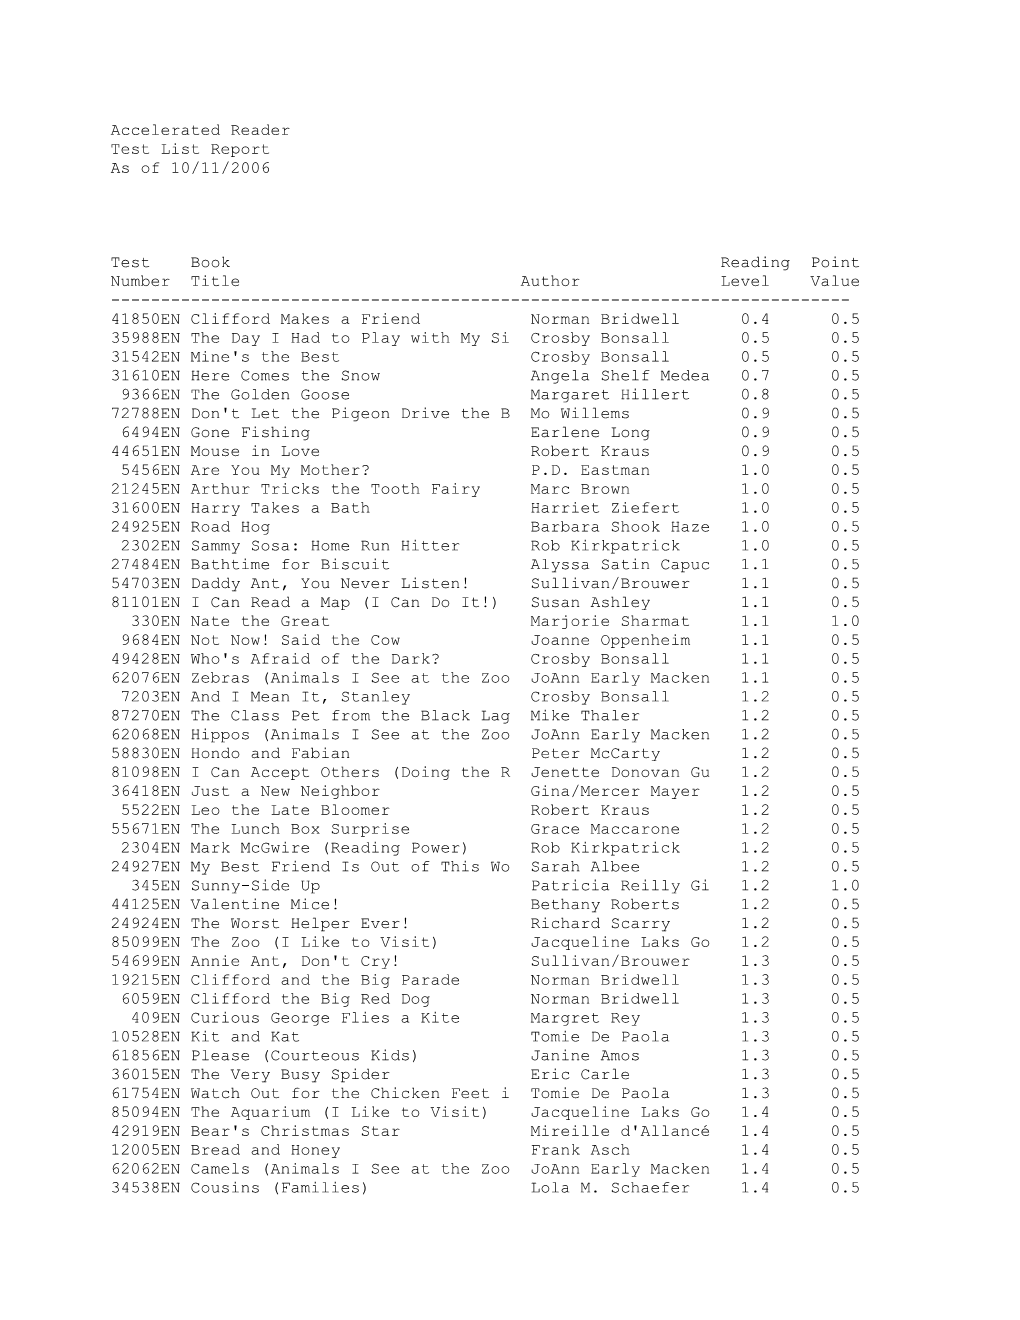 Accelerated Reader Test List Report As of 10/11/2006